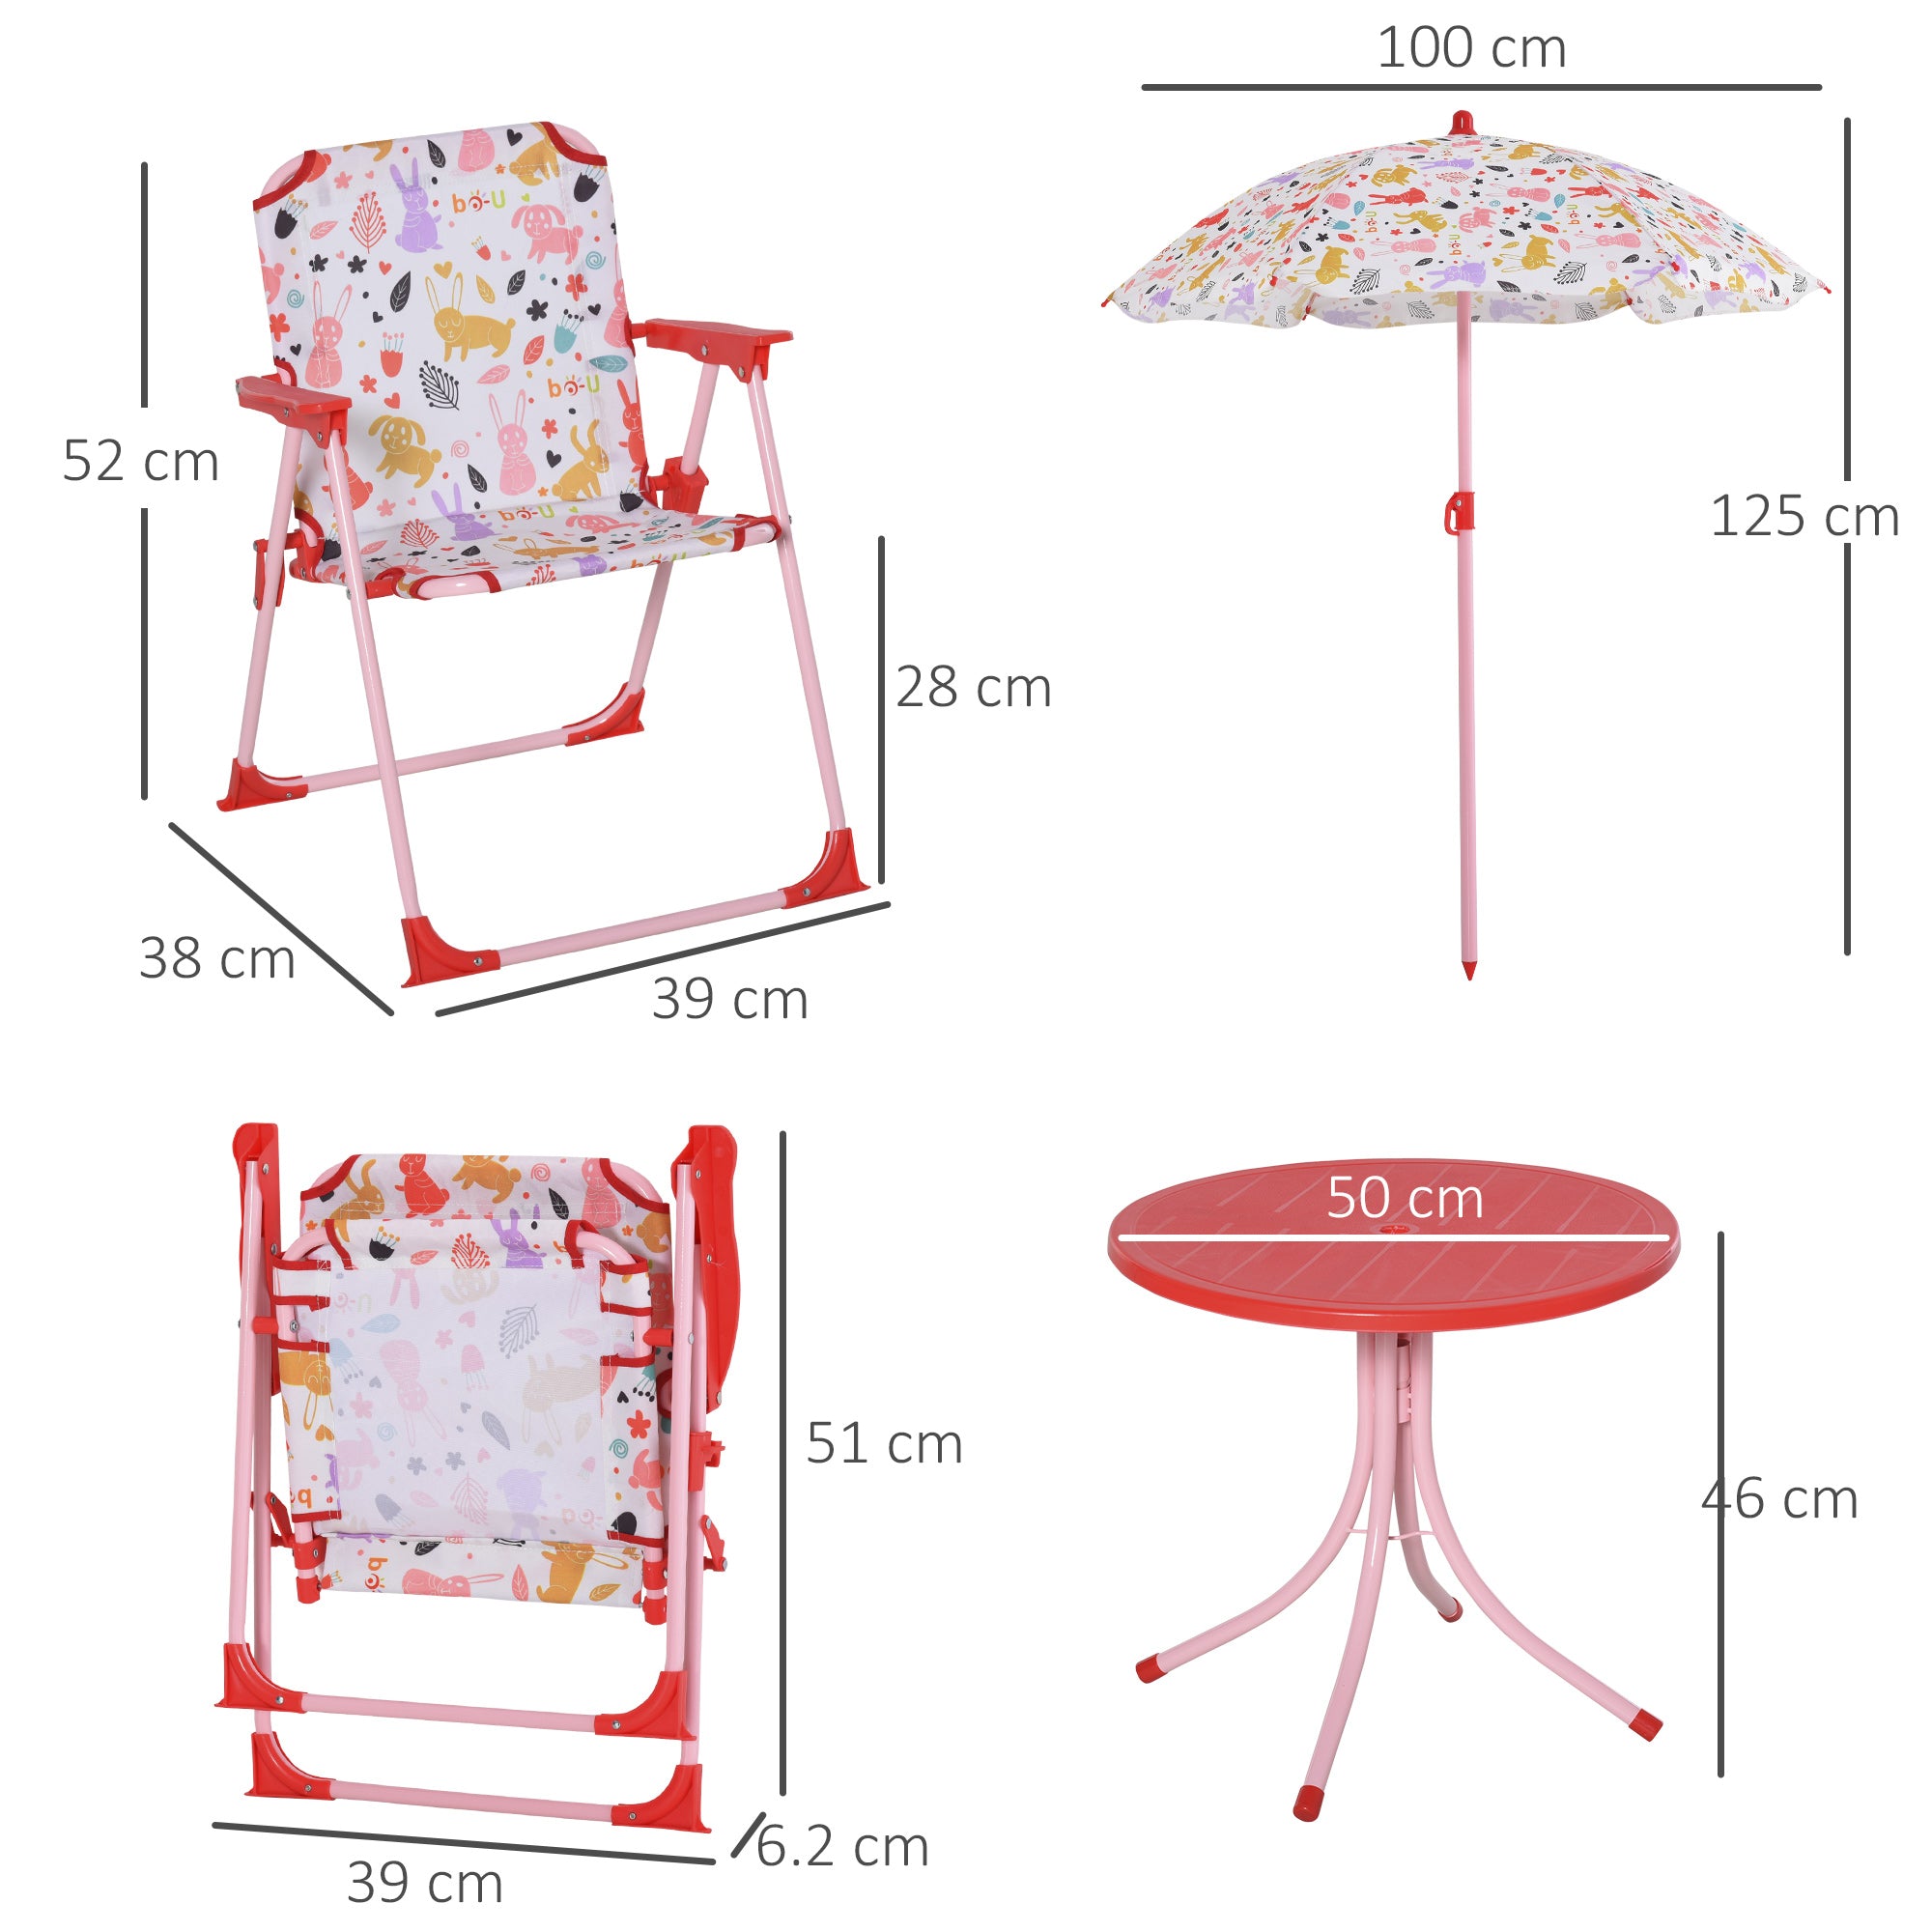 Nancy's Shoshoni Children's Seating Group - Garden Table - Folding Chairs - With Parasol - Metal - Red